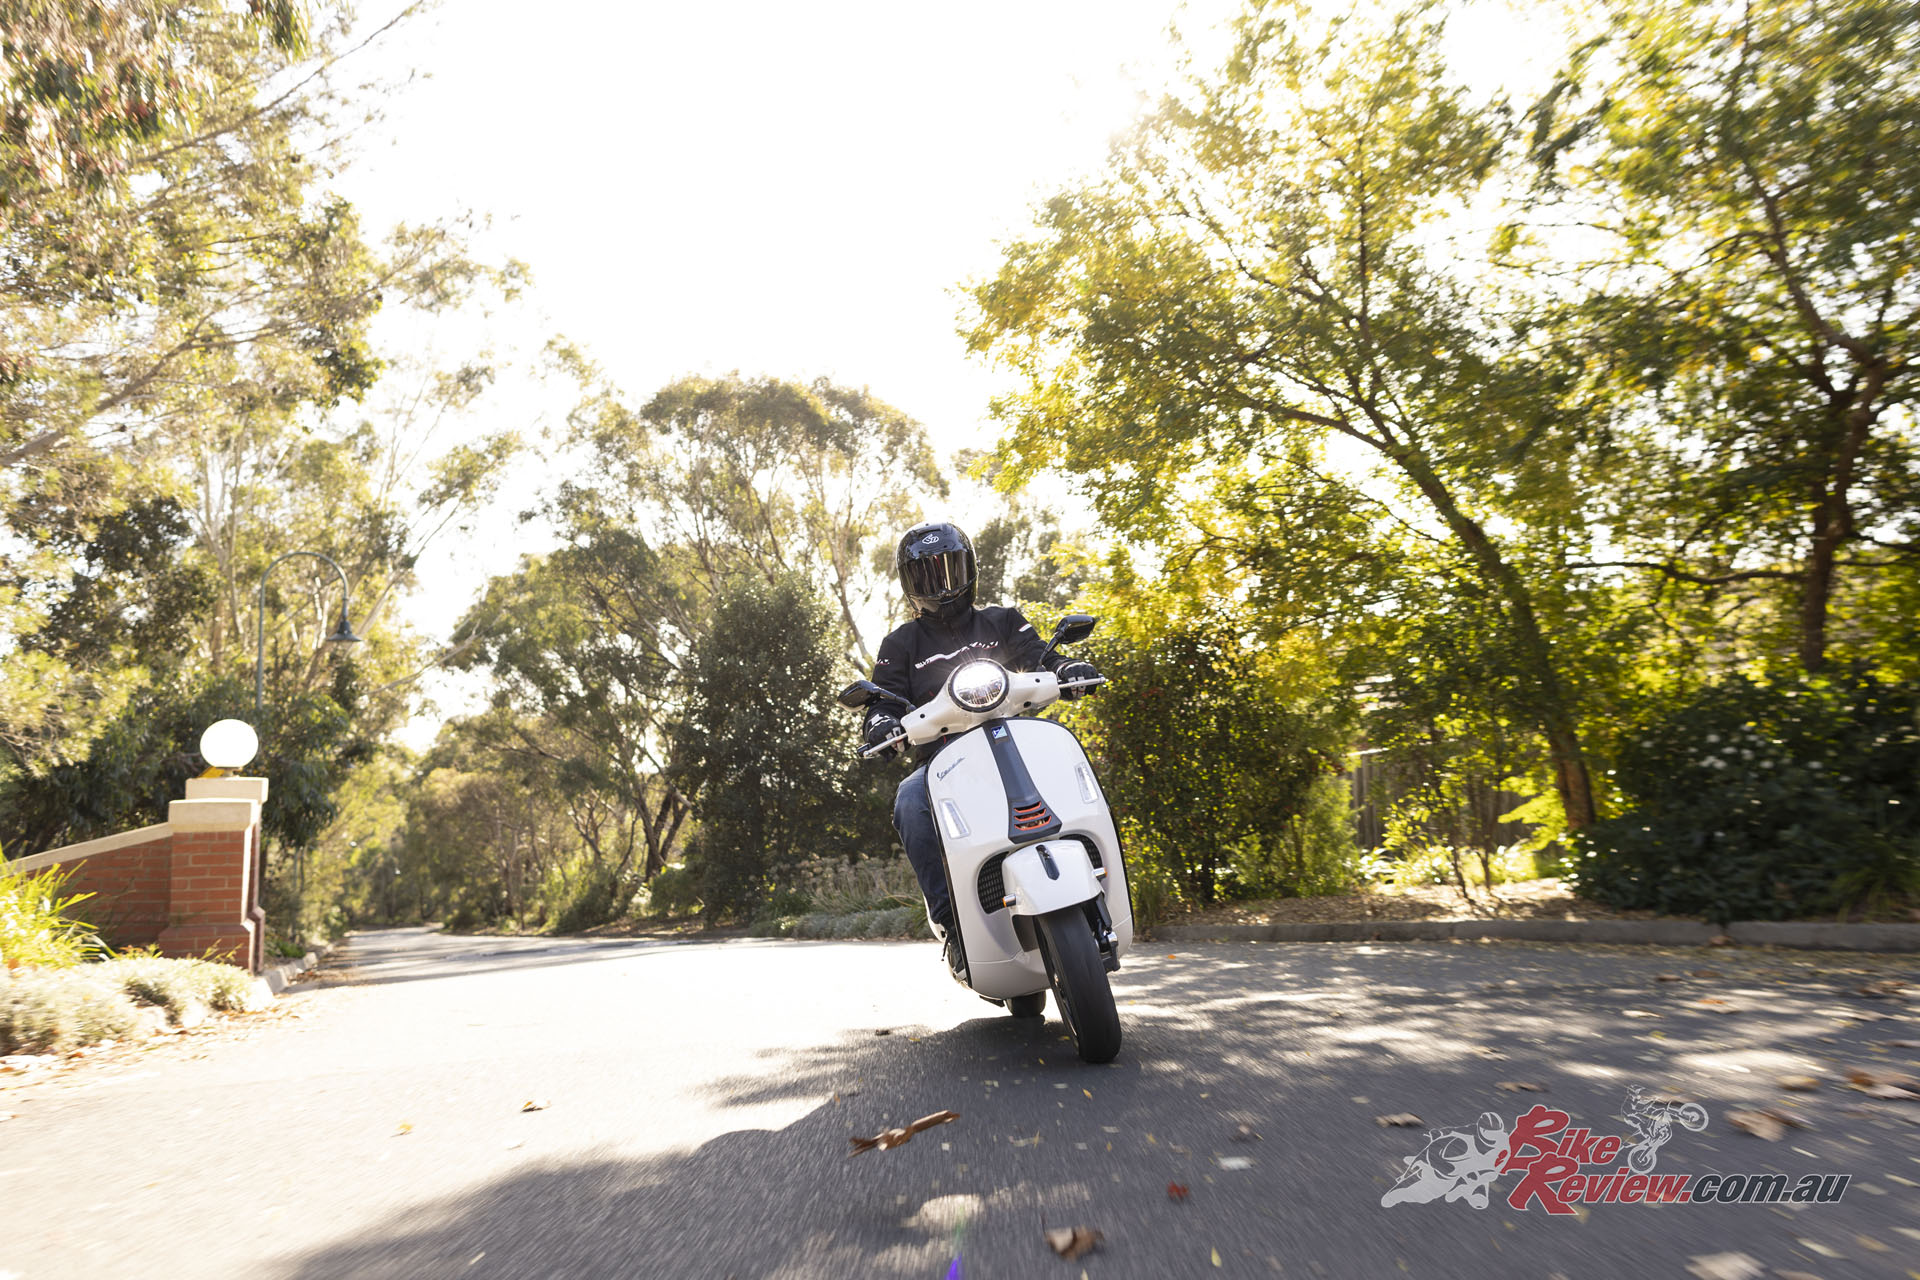 Vespa say the GTS boasts ideal ergonomics and a natural riding position that helps make it extremely comfortable, enjoyable to ride and accessible to everyone.